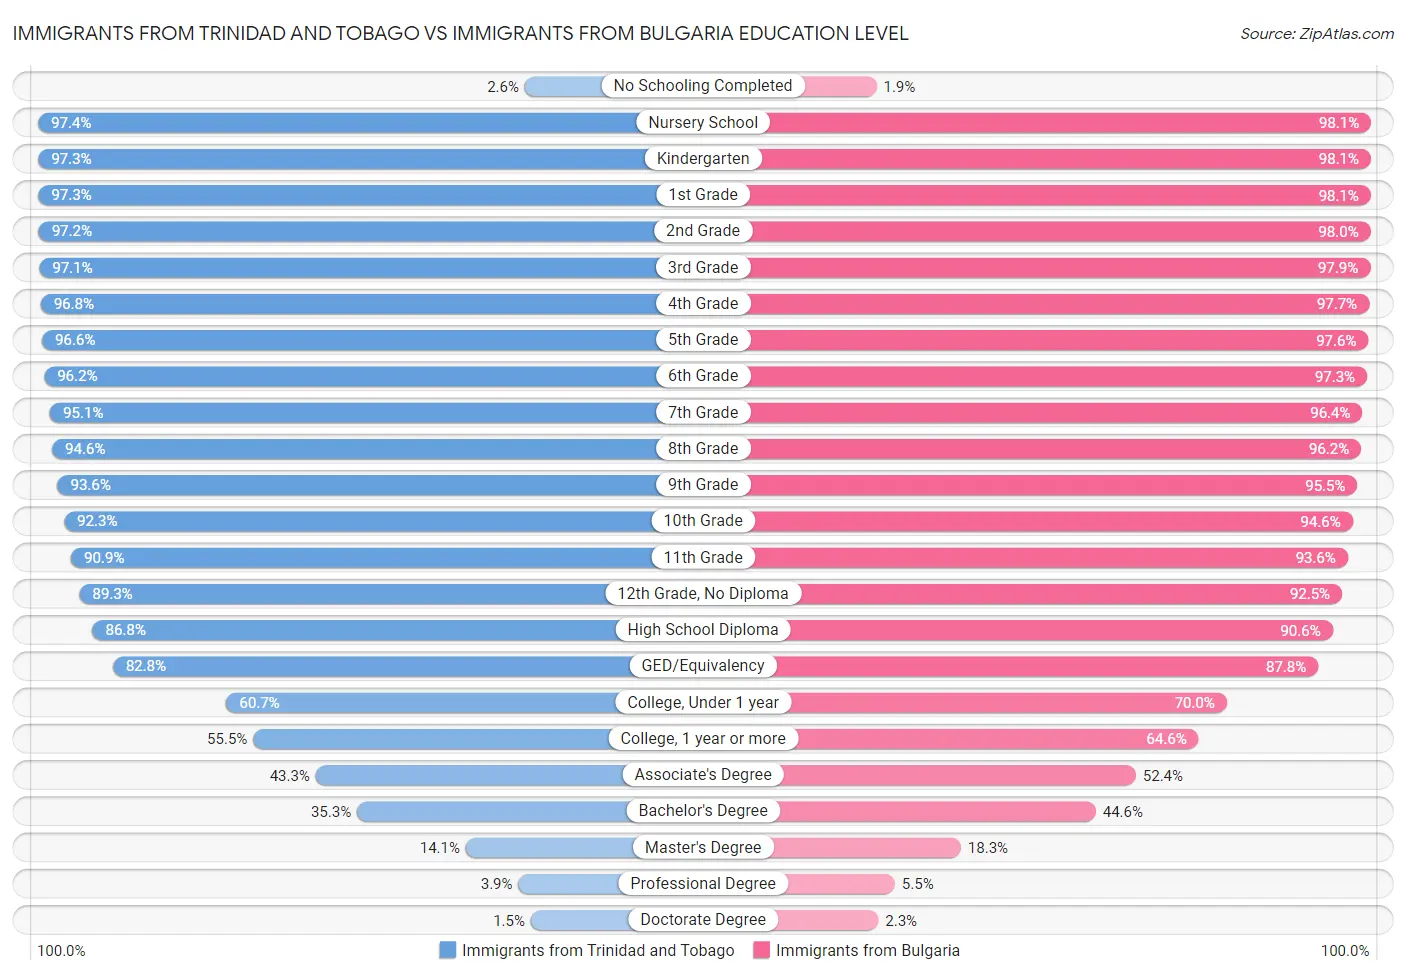 Immigrants from Trinidad and Tobago vs Immigrants from Bulgaria Education Level